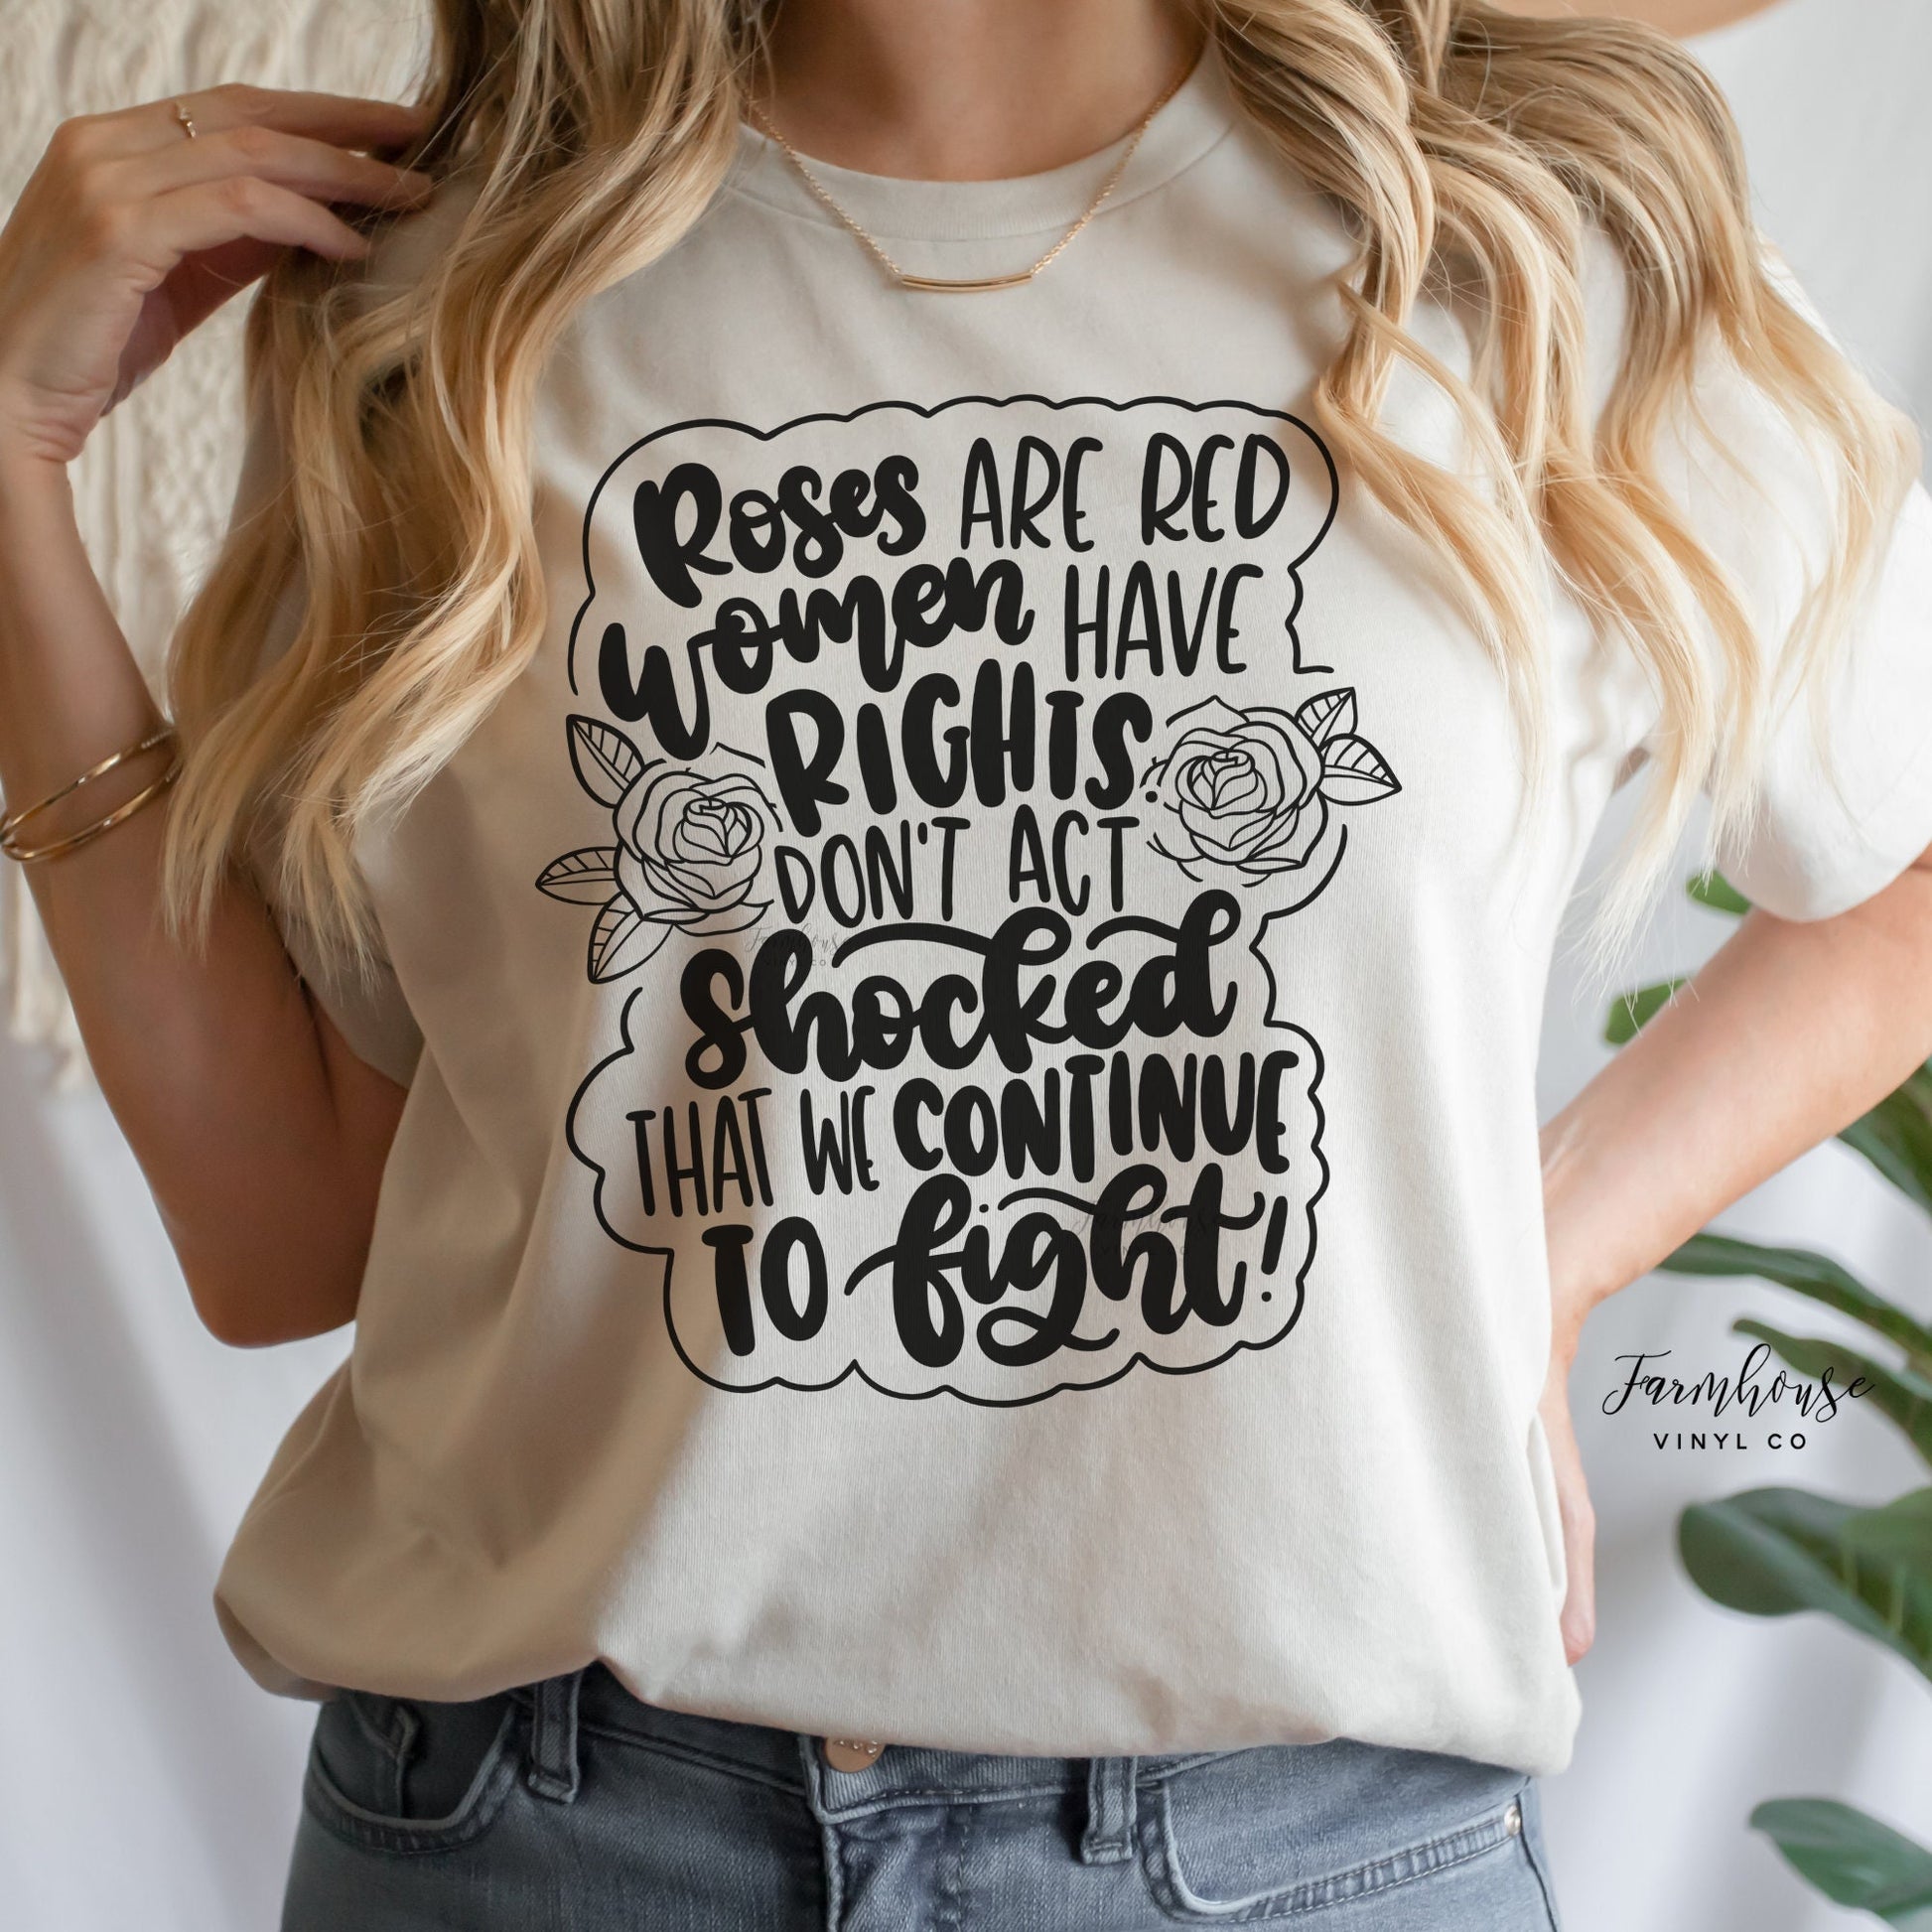 Roses Are Red Women Have Rights Tote Bag - Farmhouse Vinyl Co